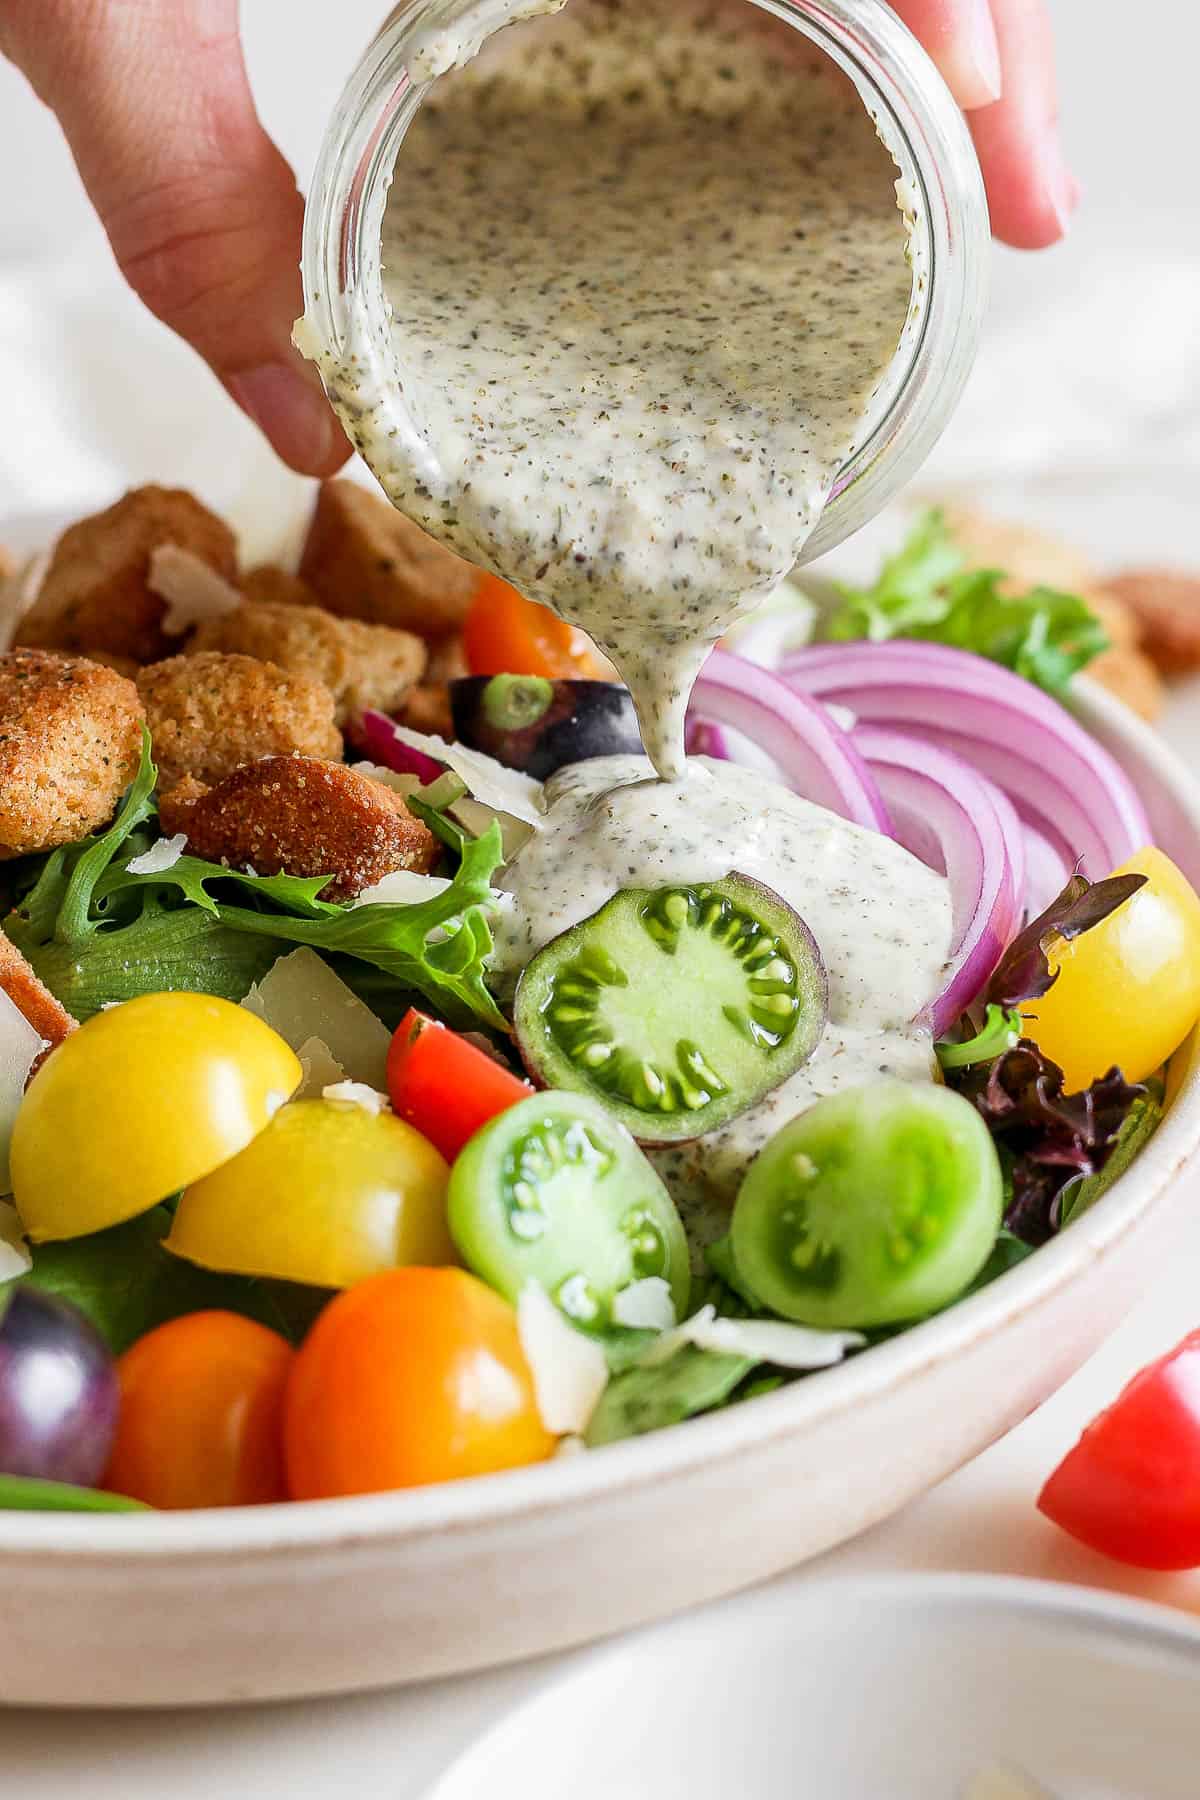 Creamy Italian dressing being poured on a house salad.